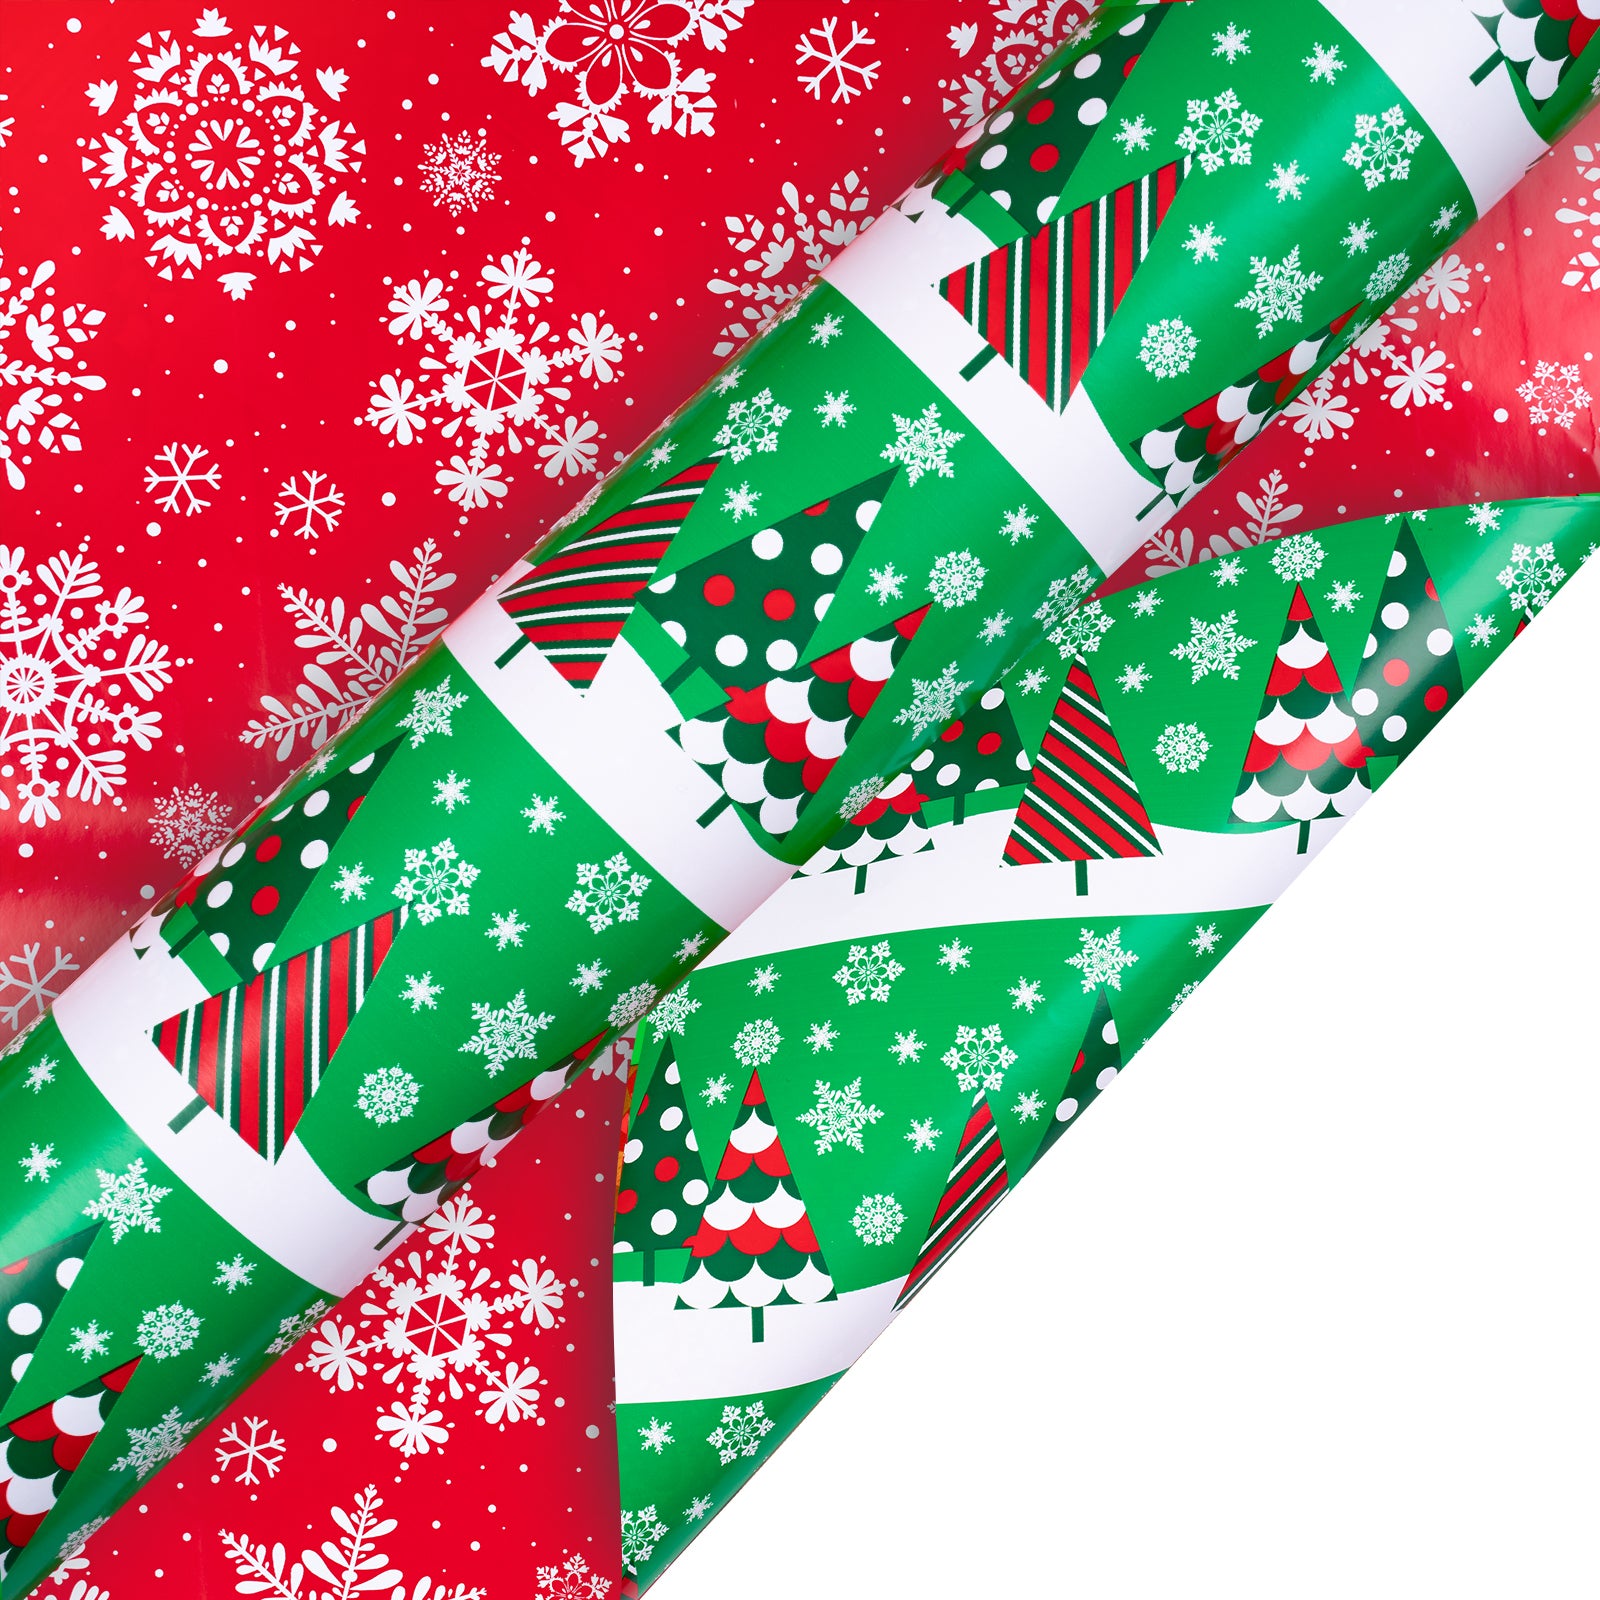 Green Christmas Tree Wrapping Paper Roll with White Snowflakes on Red on Reverse